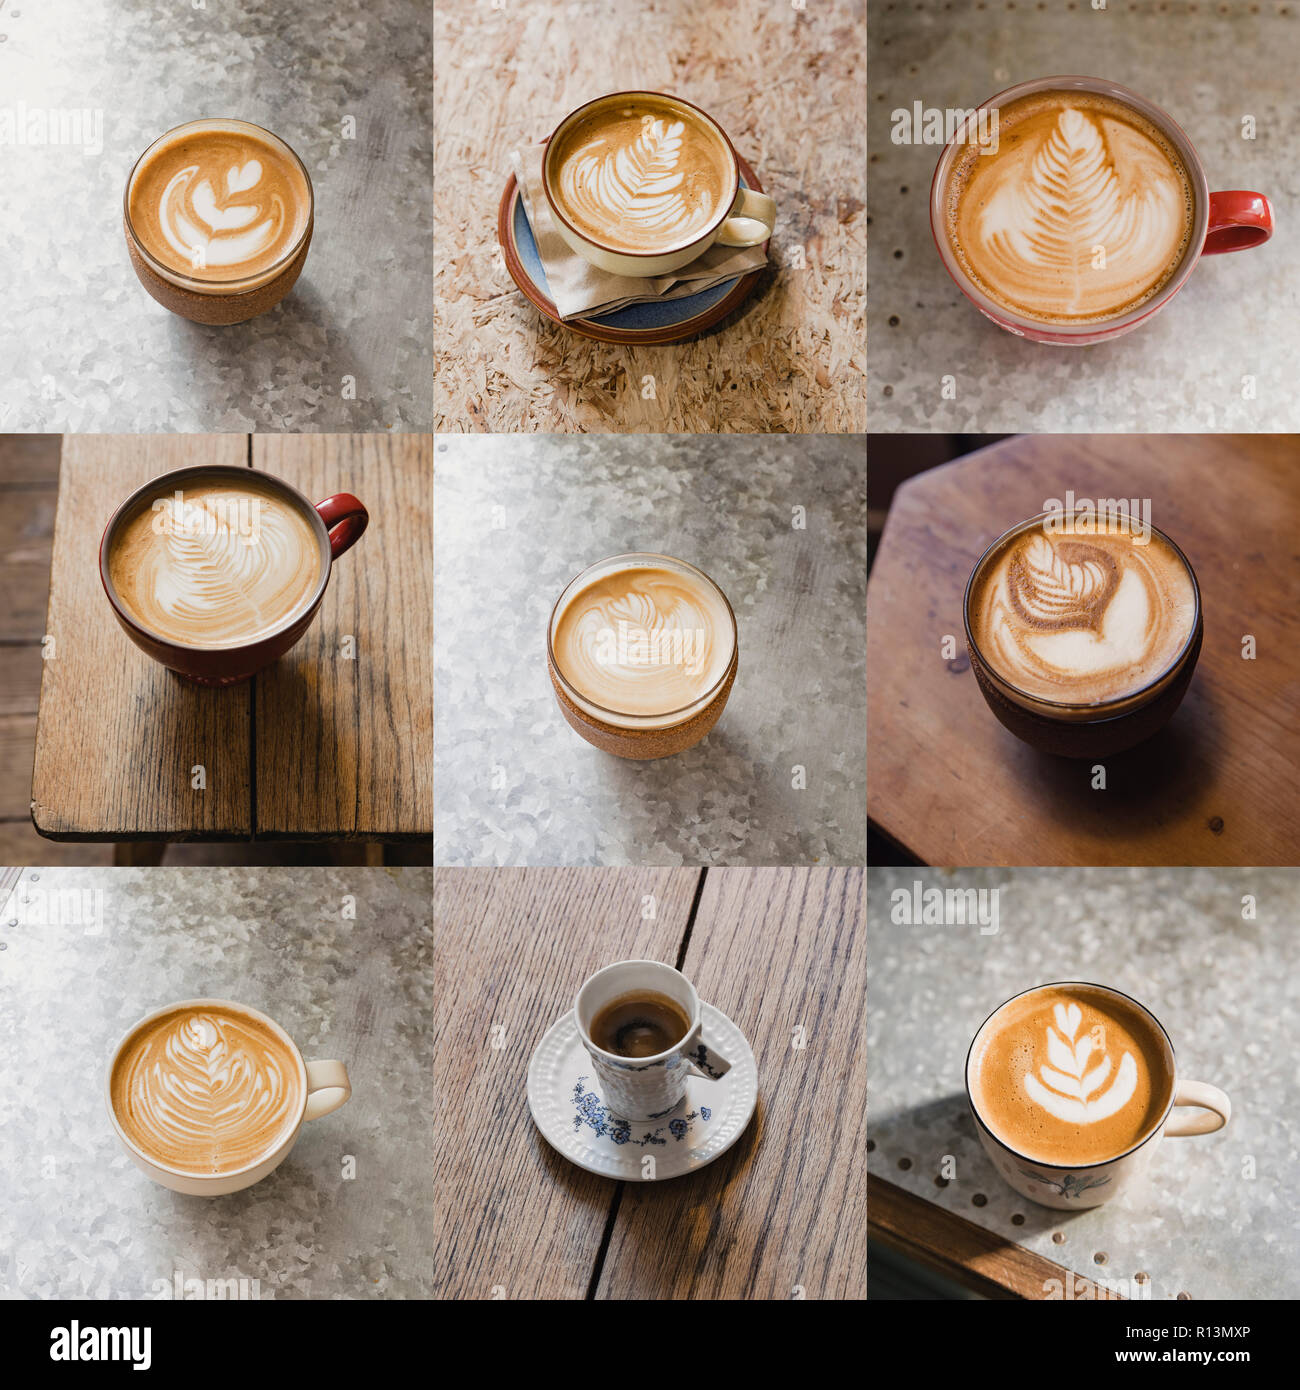 https://c8.alamy.com/comp/R13MXP/image-montage-of-nine-cups-of-coffee-there-are-different-types-of-coffee-R13MXP.jpg